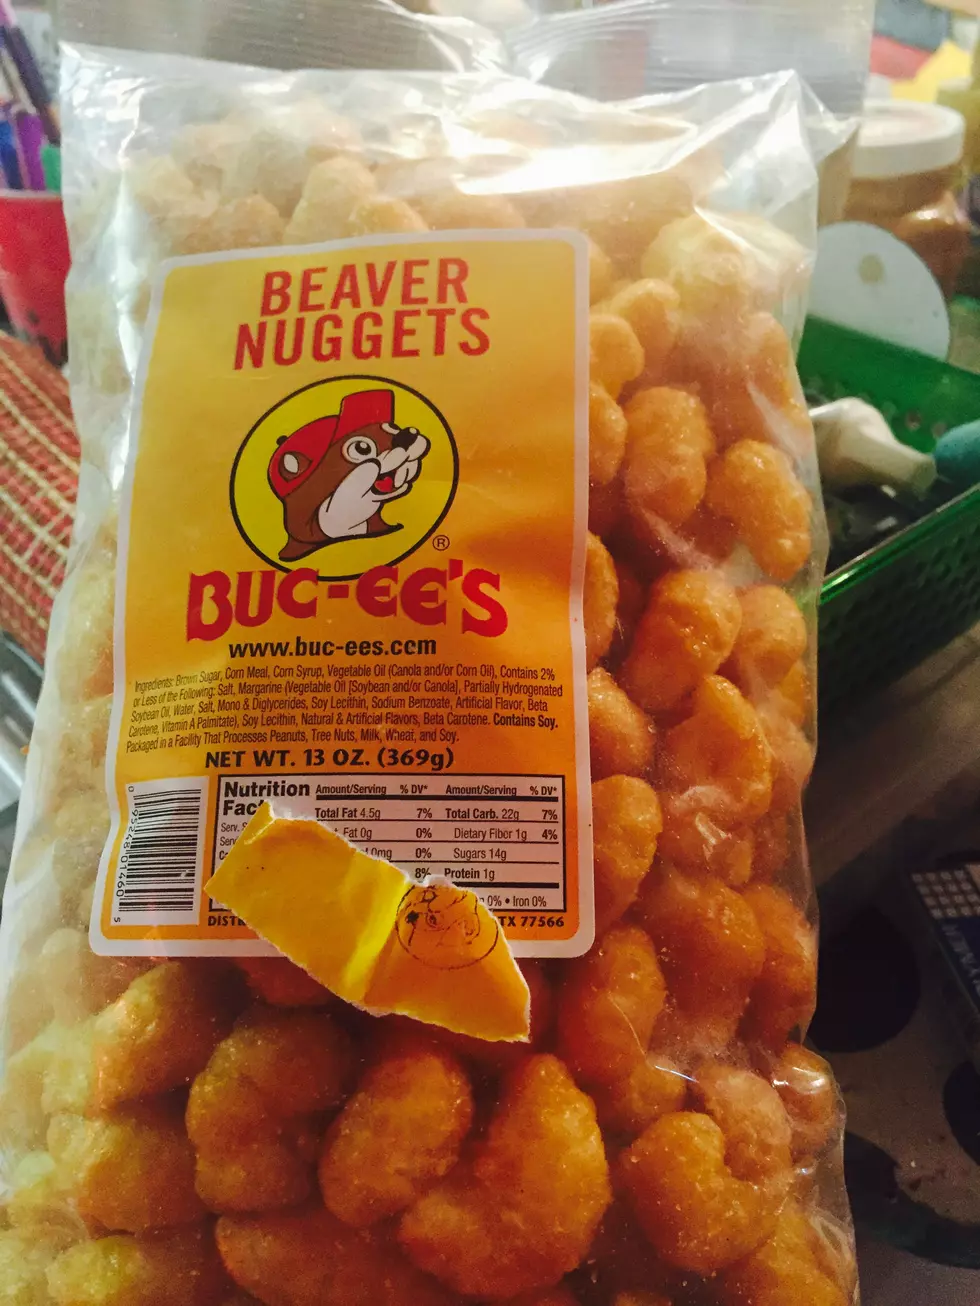 I Want To Go To Bucc-ee&#8217;s  I Love Beaver Nuggets